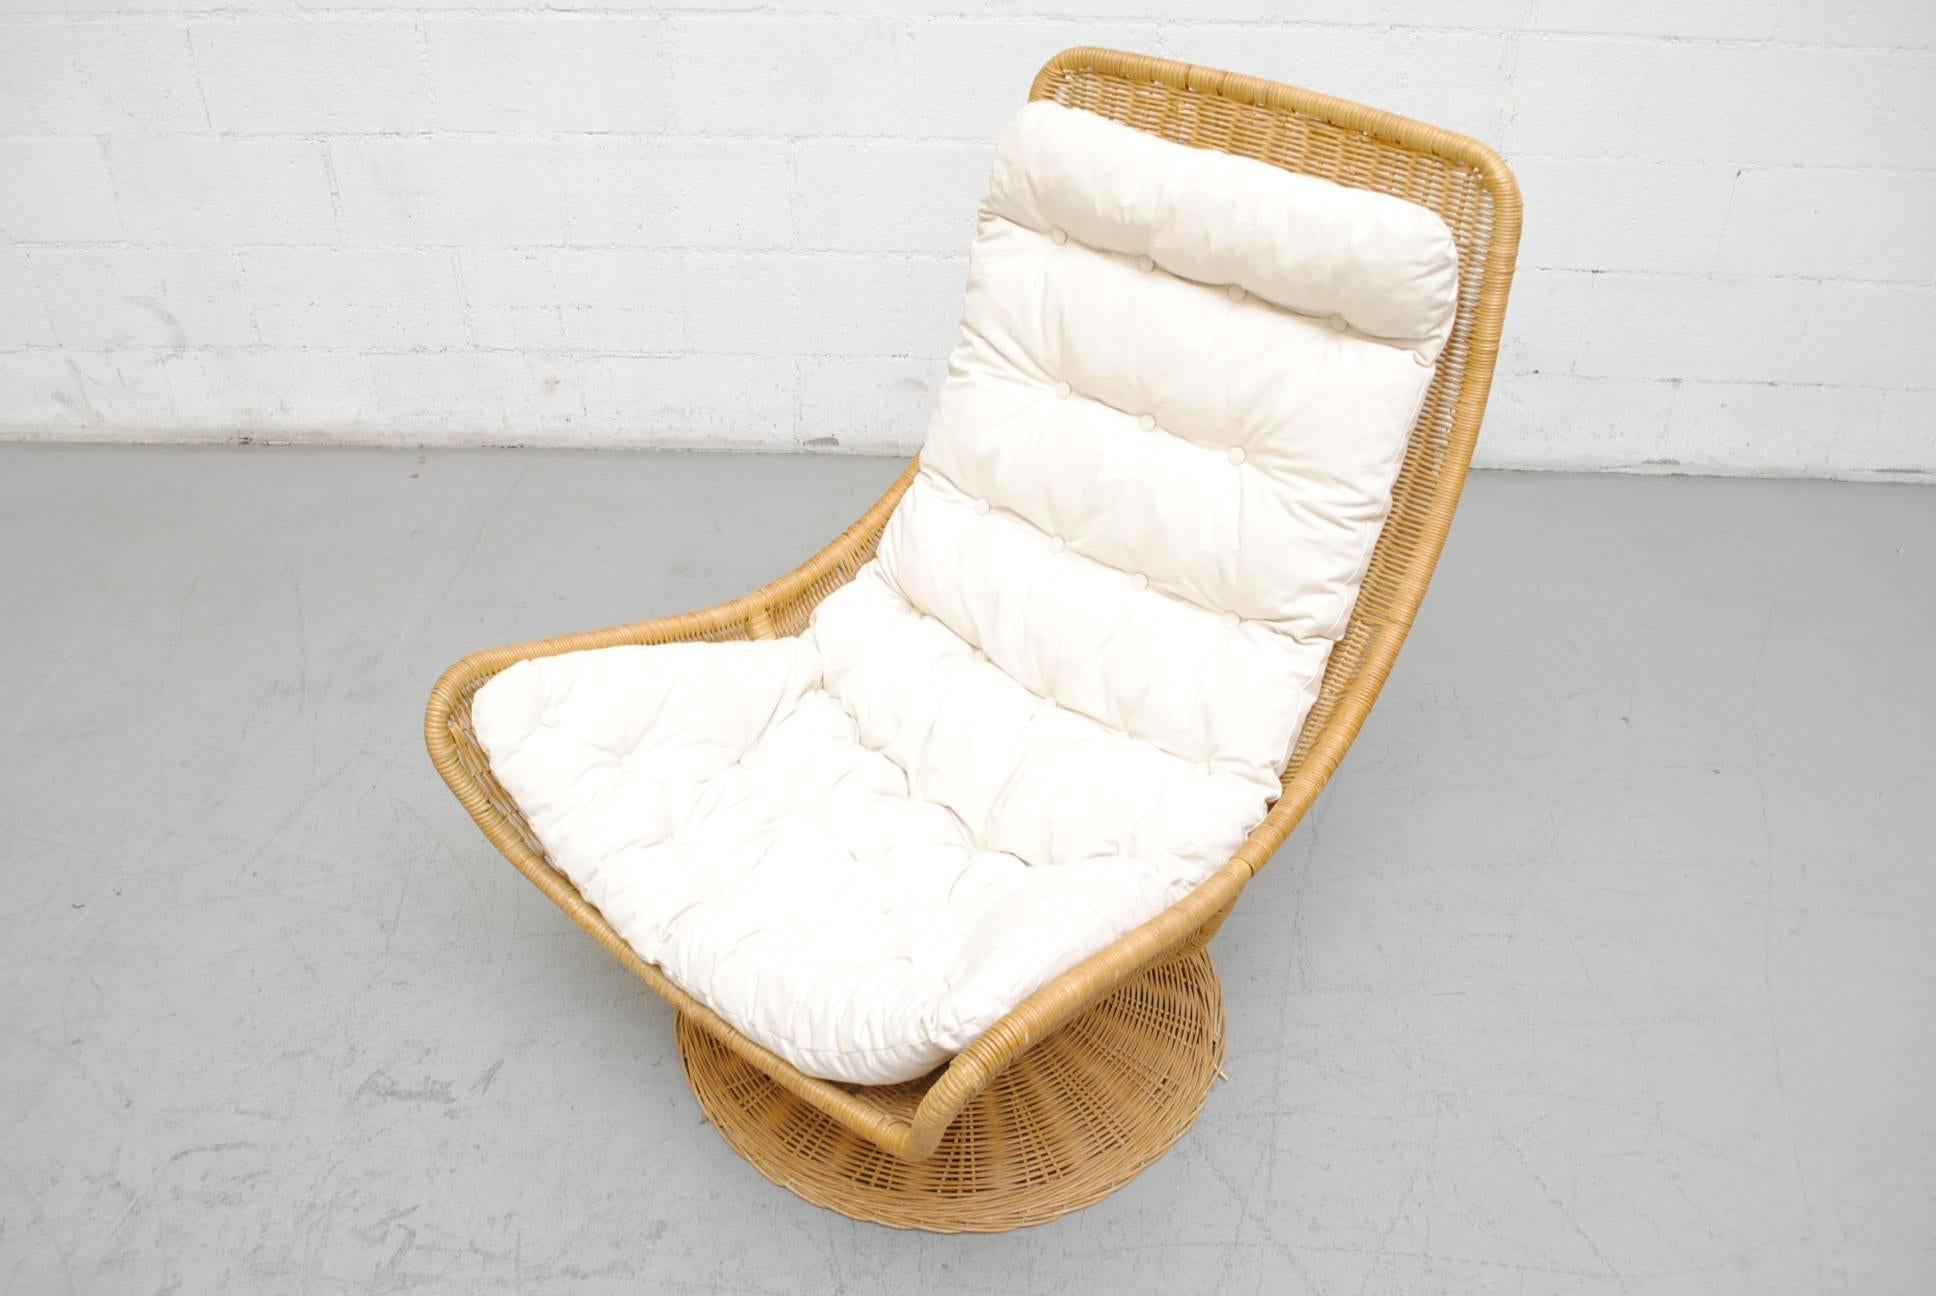 Gorgeous woven rattan swivel chair with new natural canvas cushion. Frame in good original condition with some signs of wear consistent with its age and usage.